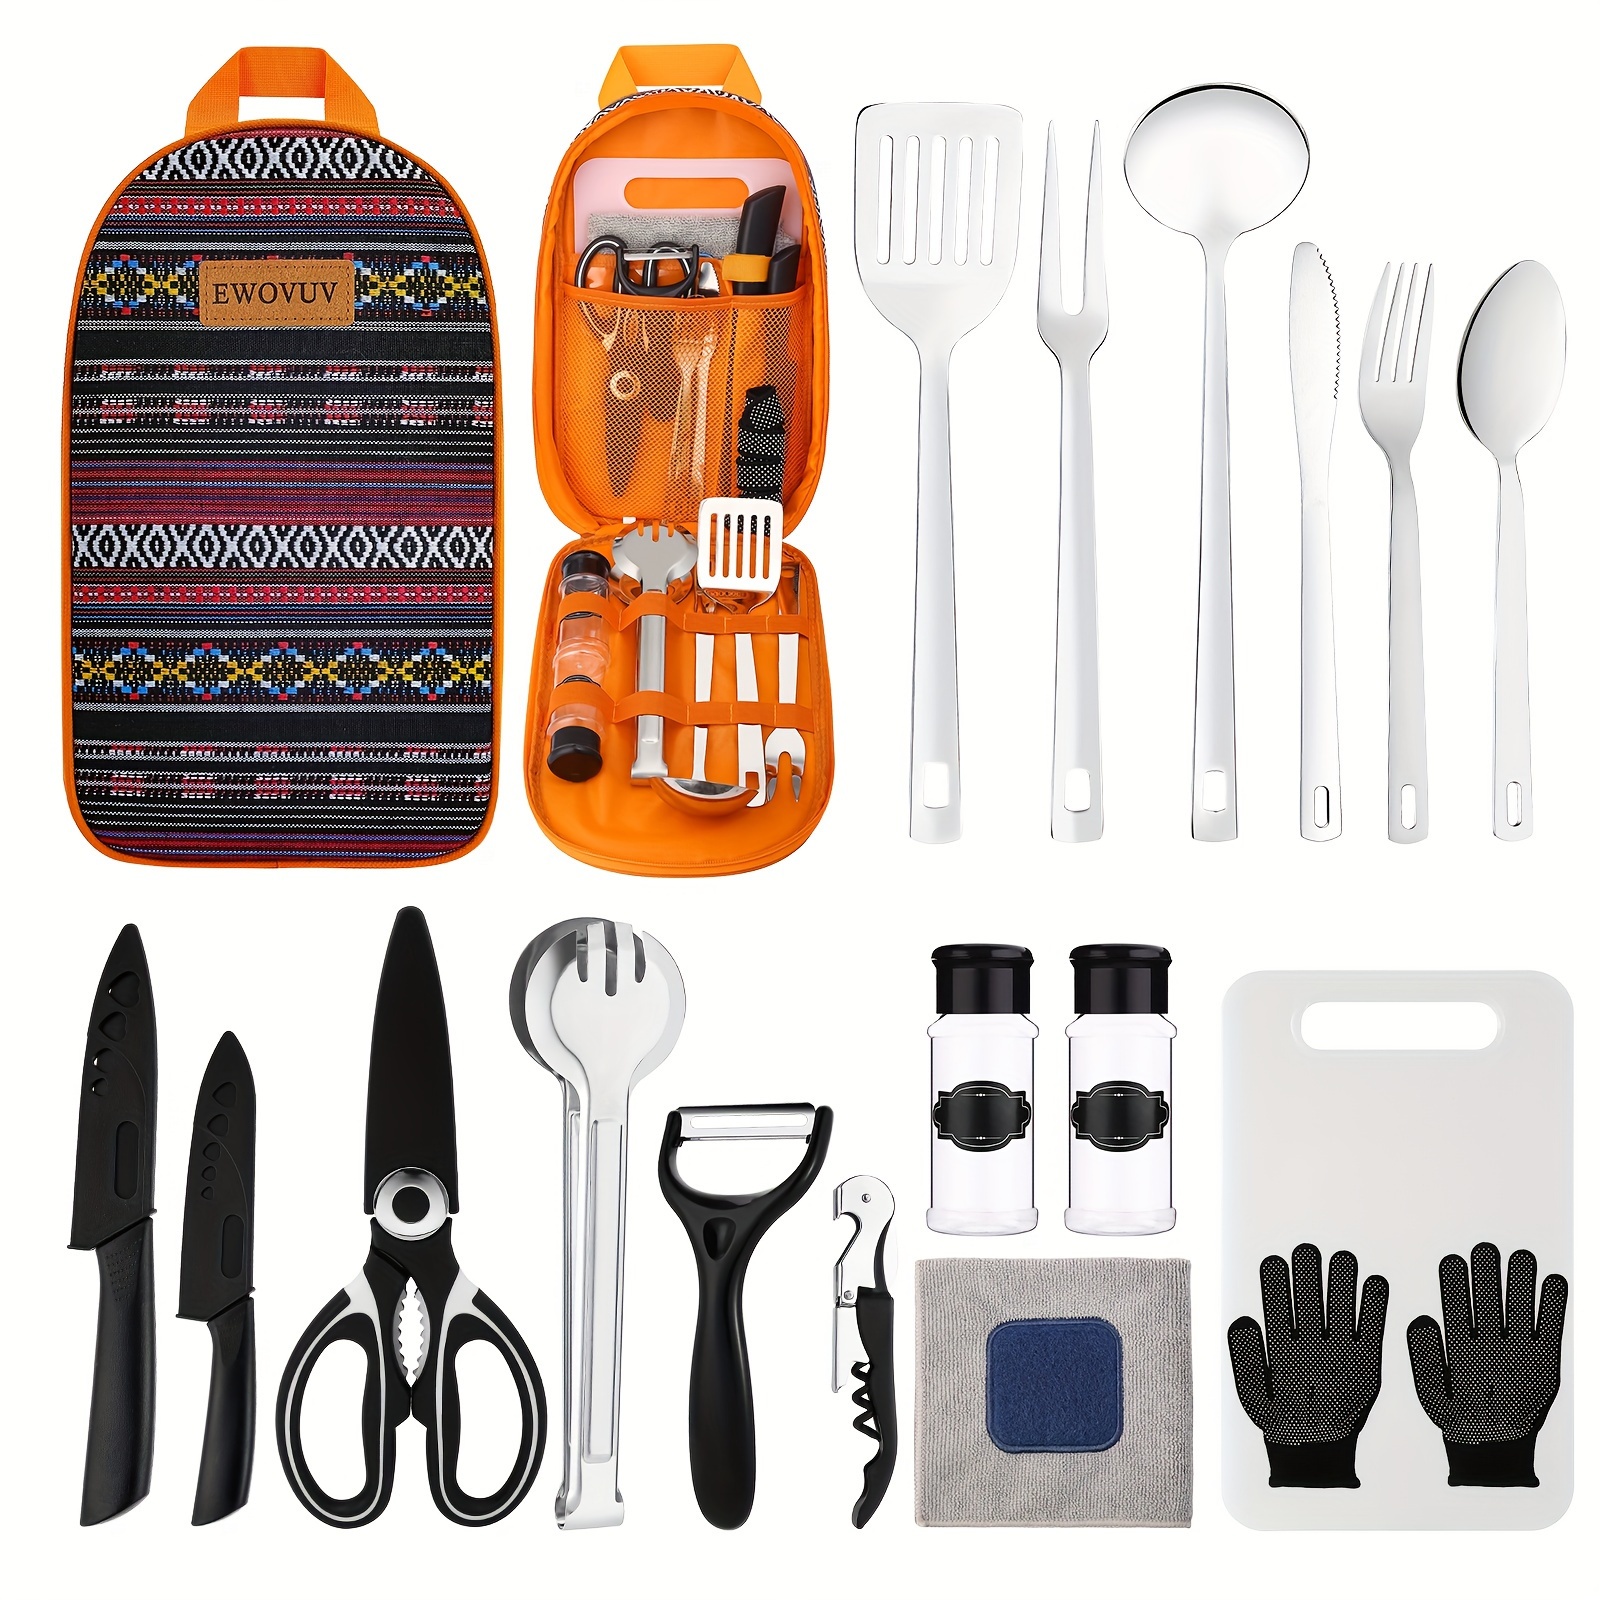 

Camping Cooking Utensils Set Camping Essentials Cookware Accessories Gear Camper Tent Camp Kitchen Rv Gadgets Outdoor Stove Portable Picnic Gifts Bbq Stuff